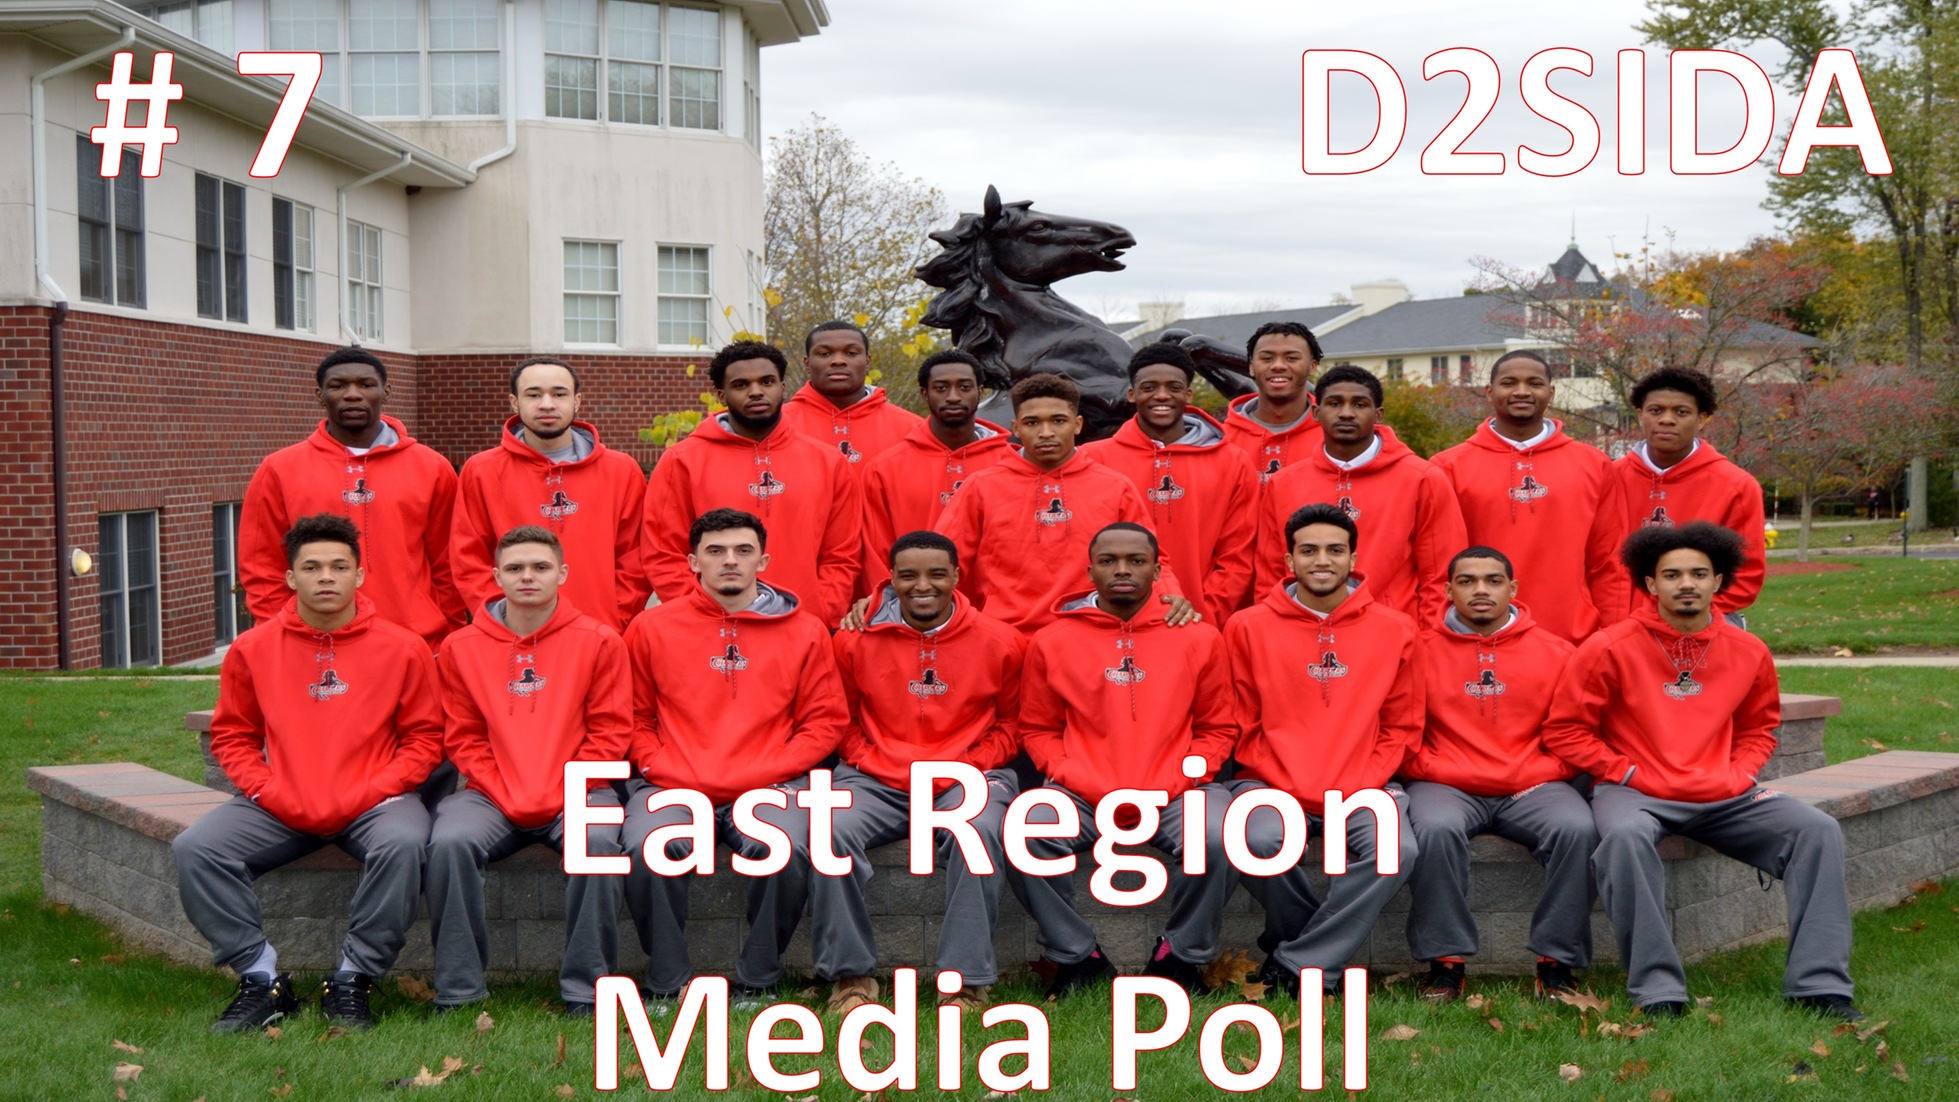 MEN'S BASKETBALL MOVE UP ONE SPOT IN LATEST D2SIDA EAST REGION RANKINGS